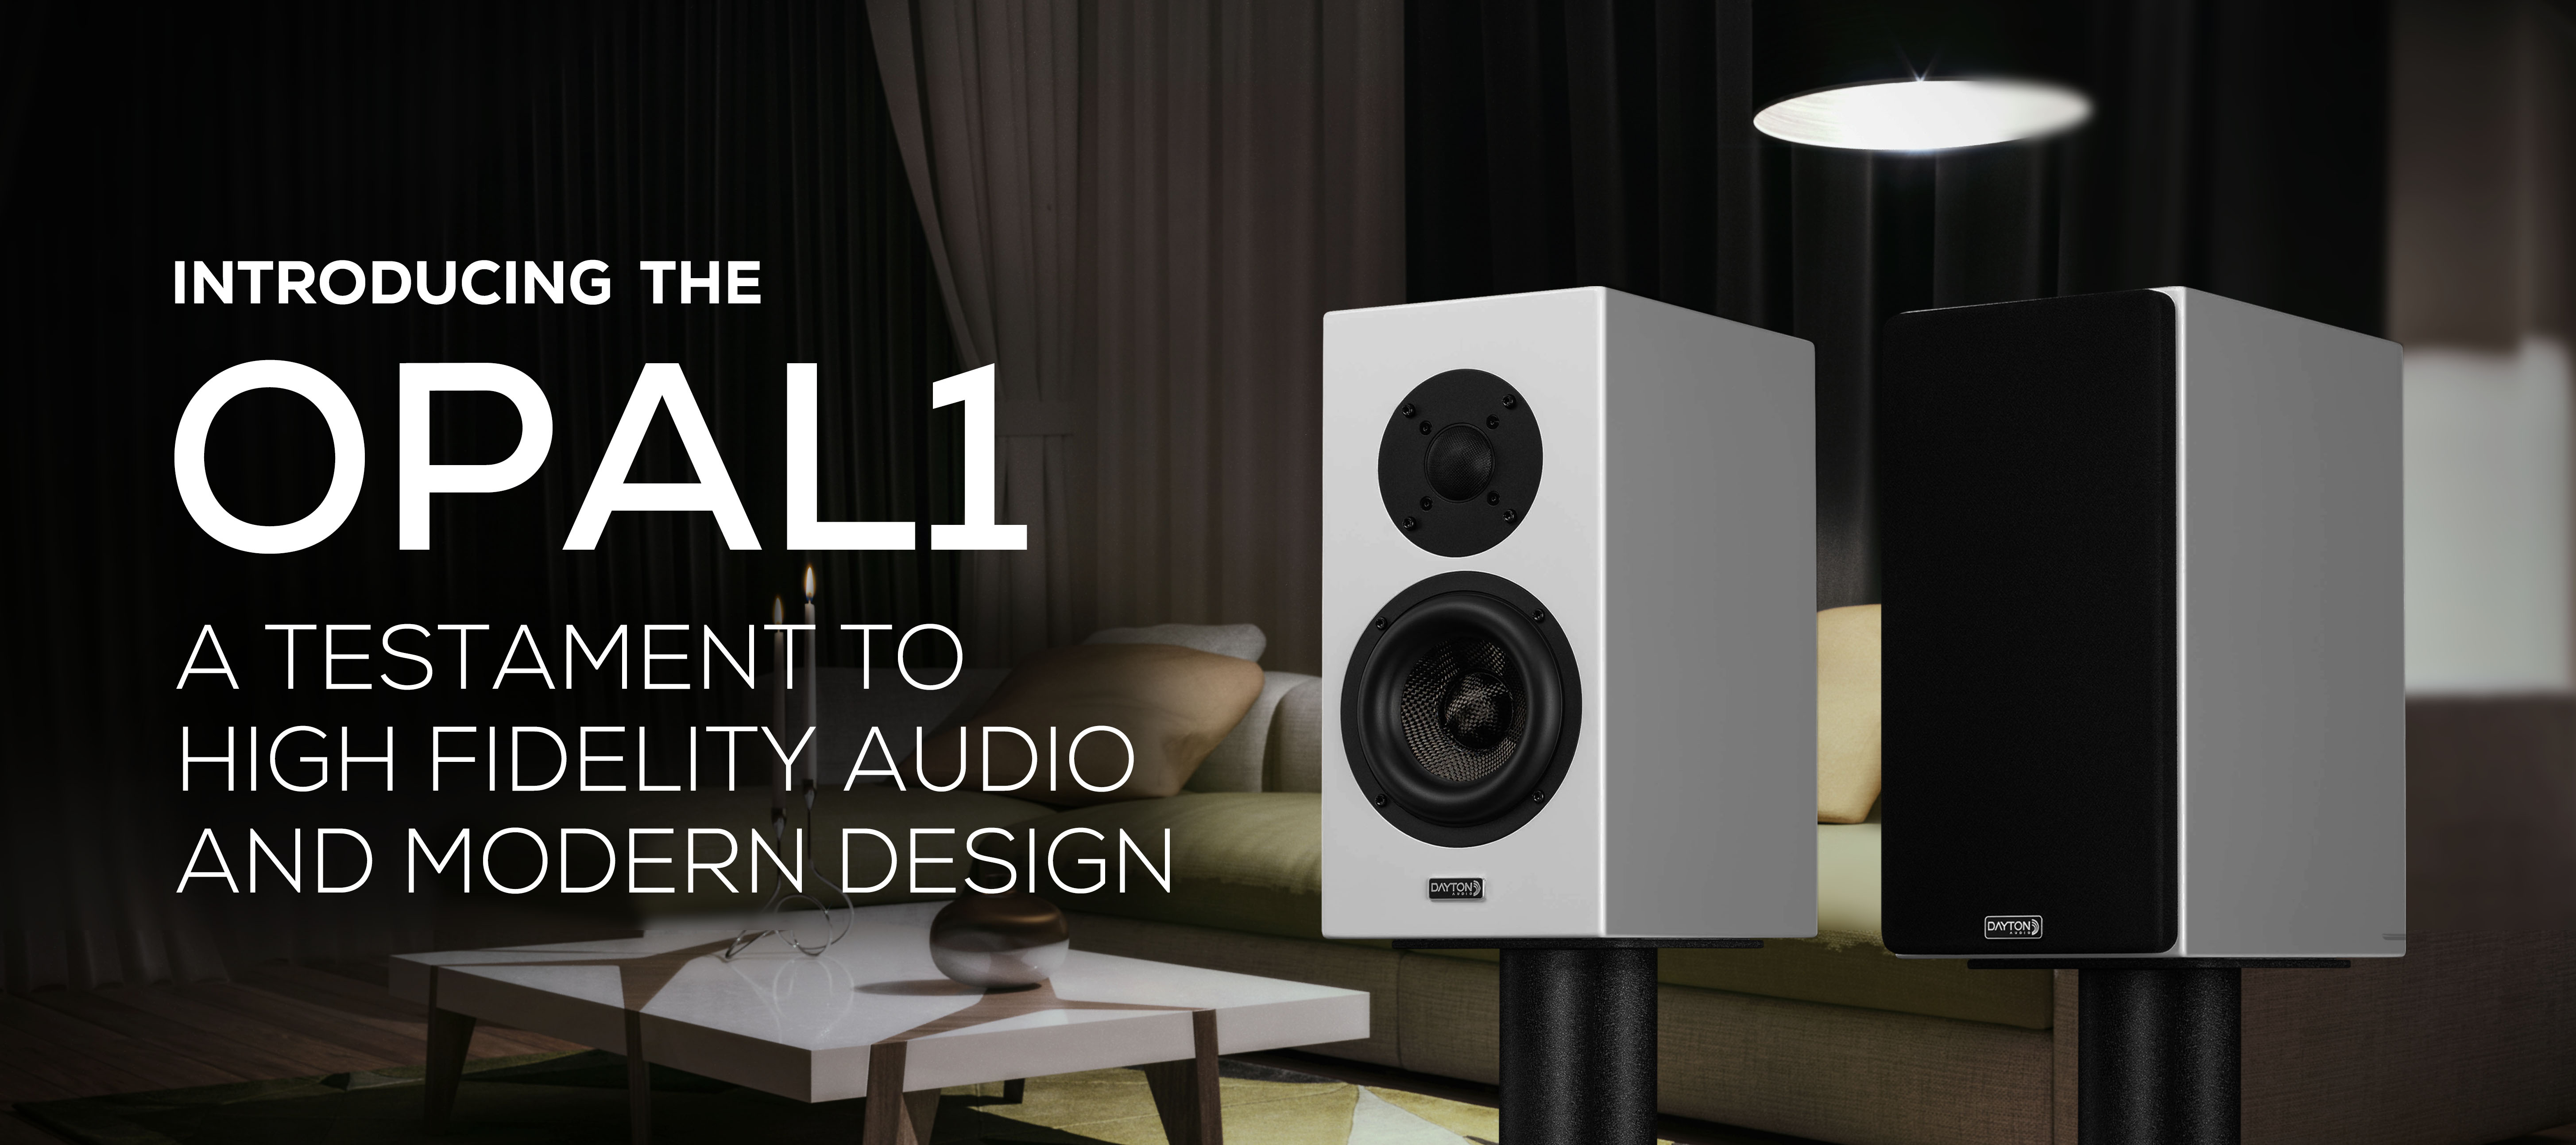 Introducing the OPAL1 - A testament to high fidelity audio and modern design